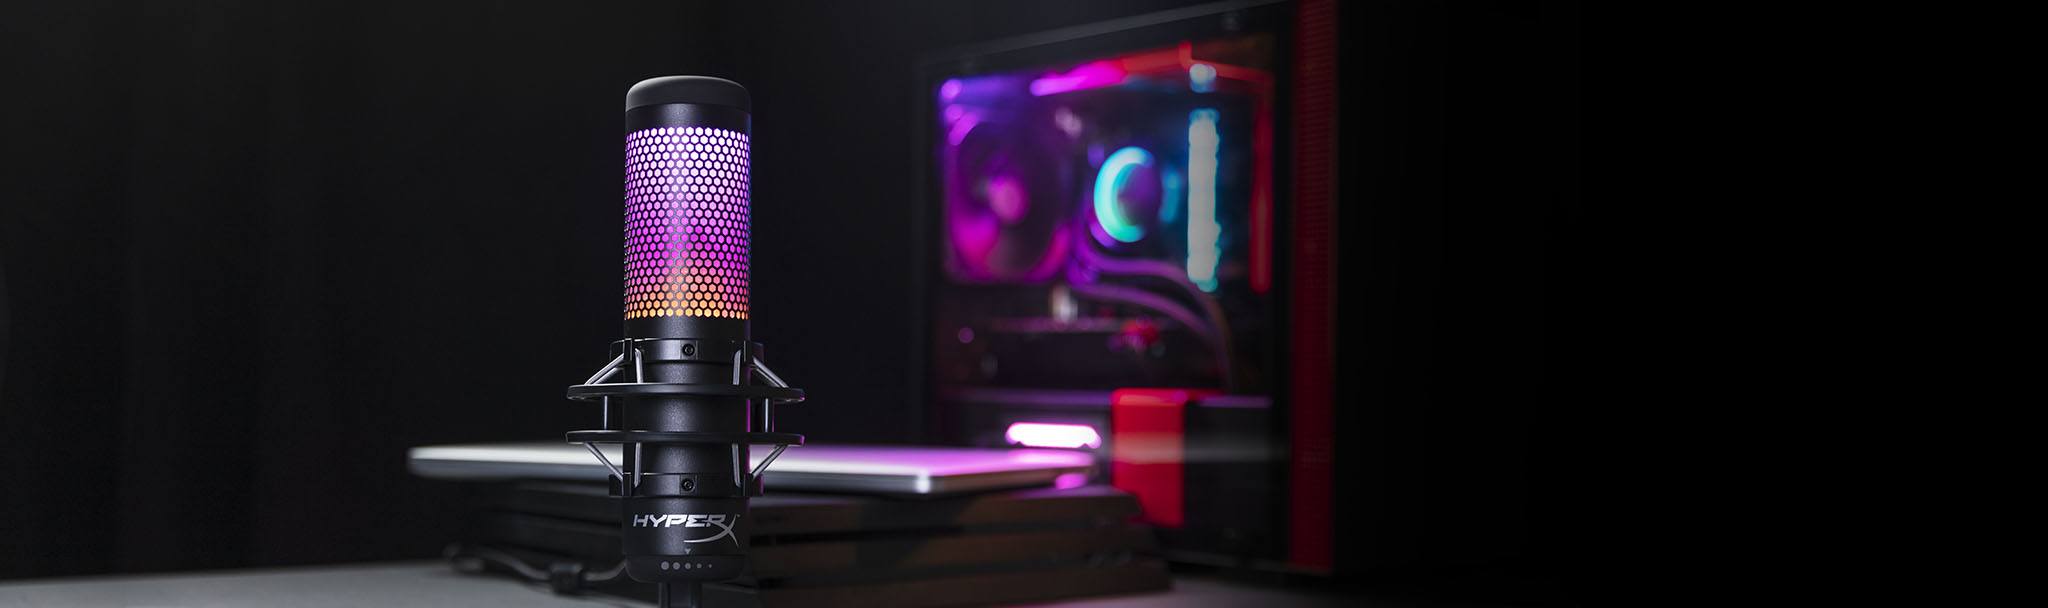 HyperX QuadCast S stand alone USB Microphone customizable Dynamic RGB Lighting tap to mute ( sensor ) Four selectable polar patterns 2 meter USB cable length HMIQ1S-XX-RG/G